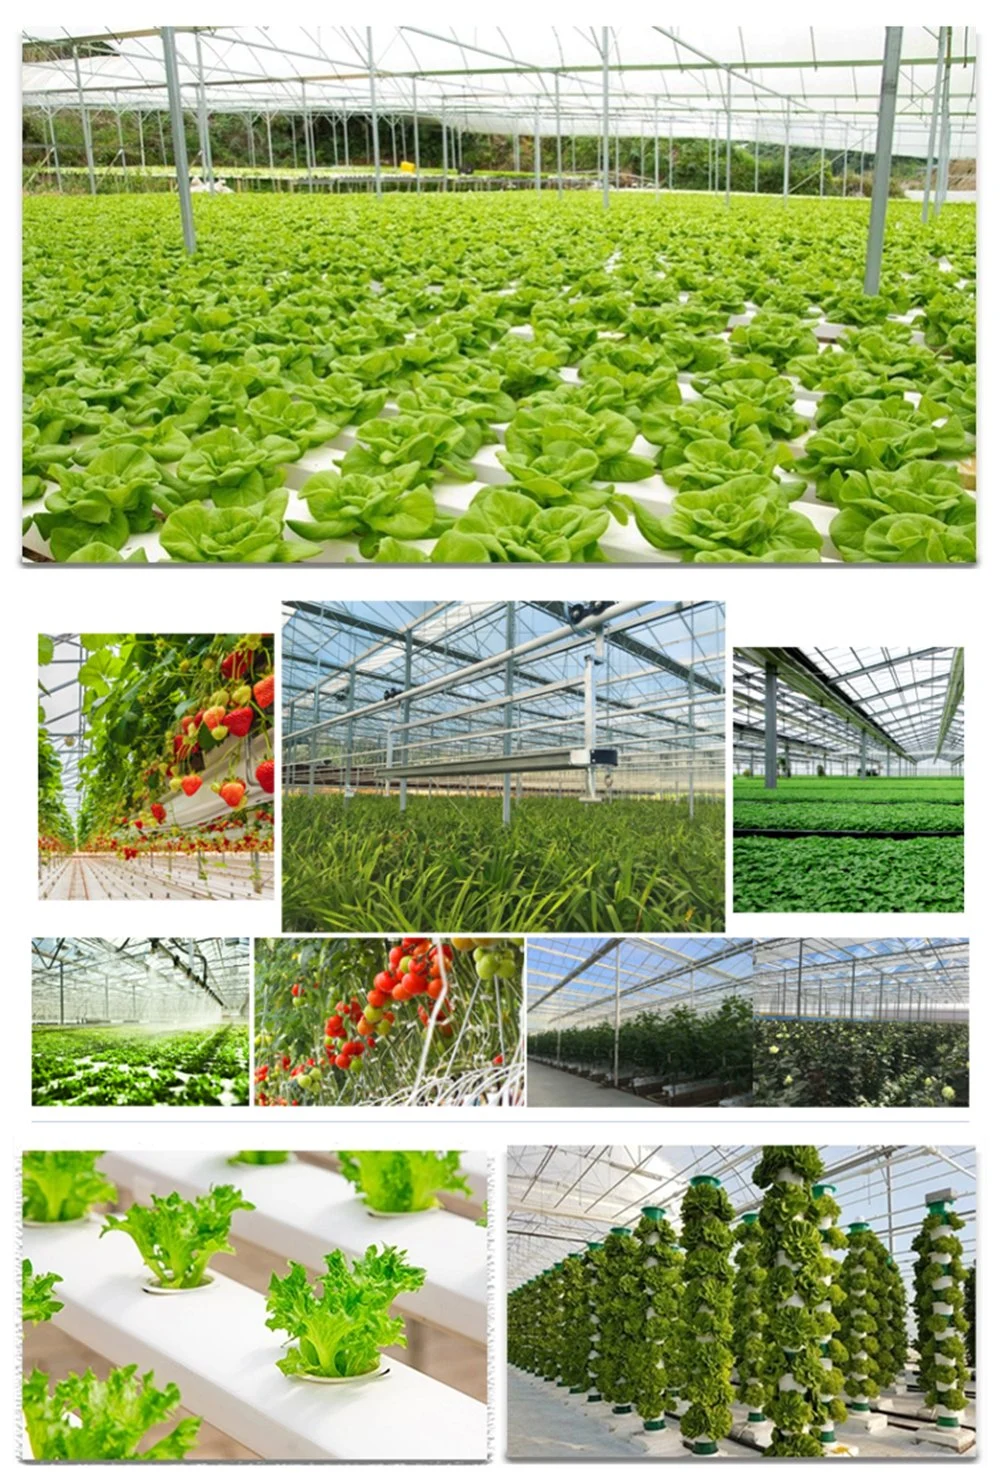 Automatic Agricultural/Multi-Span/Hollow/Tempered Glass Greenhouse with Hydroponic/Drip Irrigation System